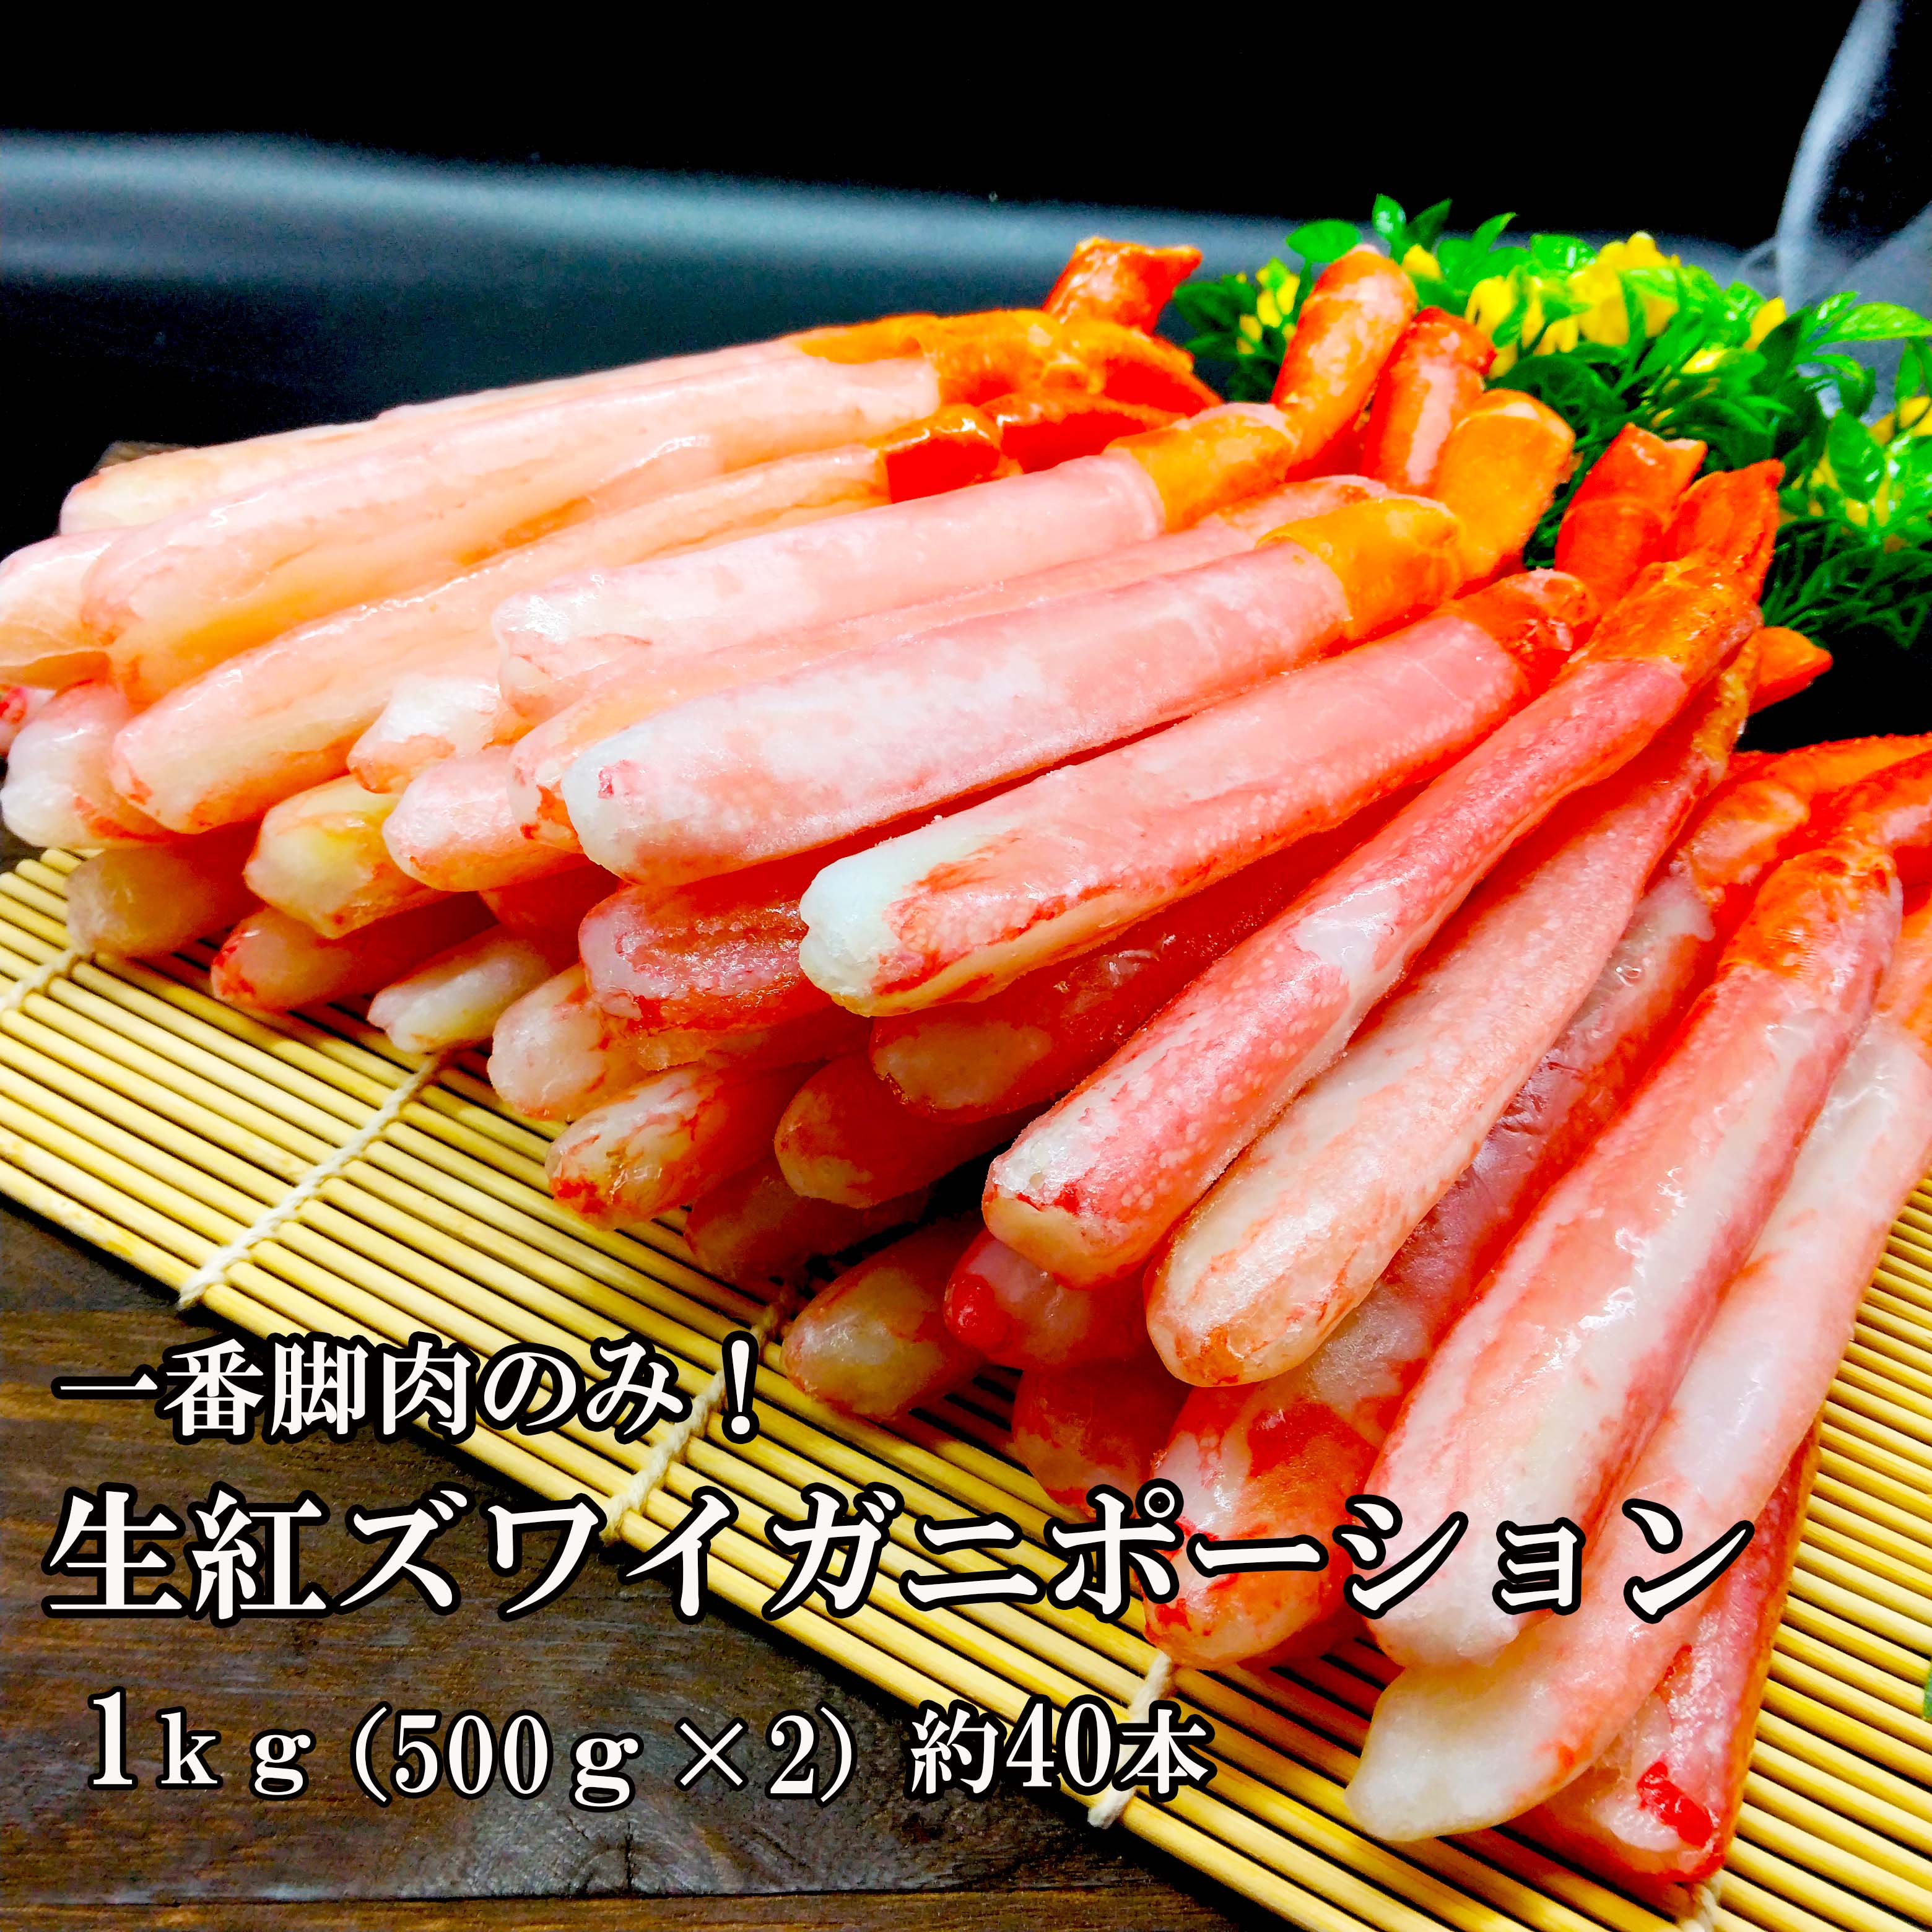  raw red snow crab Poe shon most legs meat only extra-large size sashimi for 1kg 500g×2 approximately 40ps.@ the New Year's holiday crab . crab Poe shon crab Poe shon